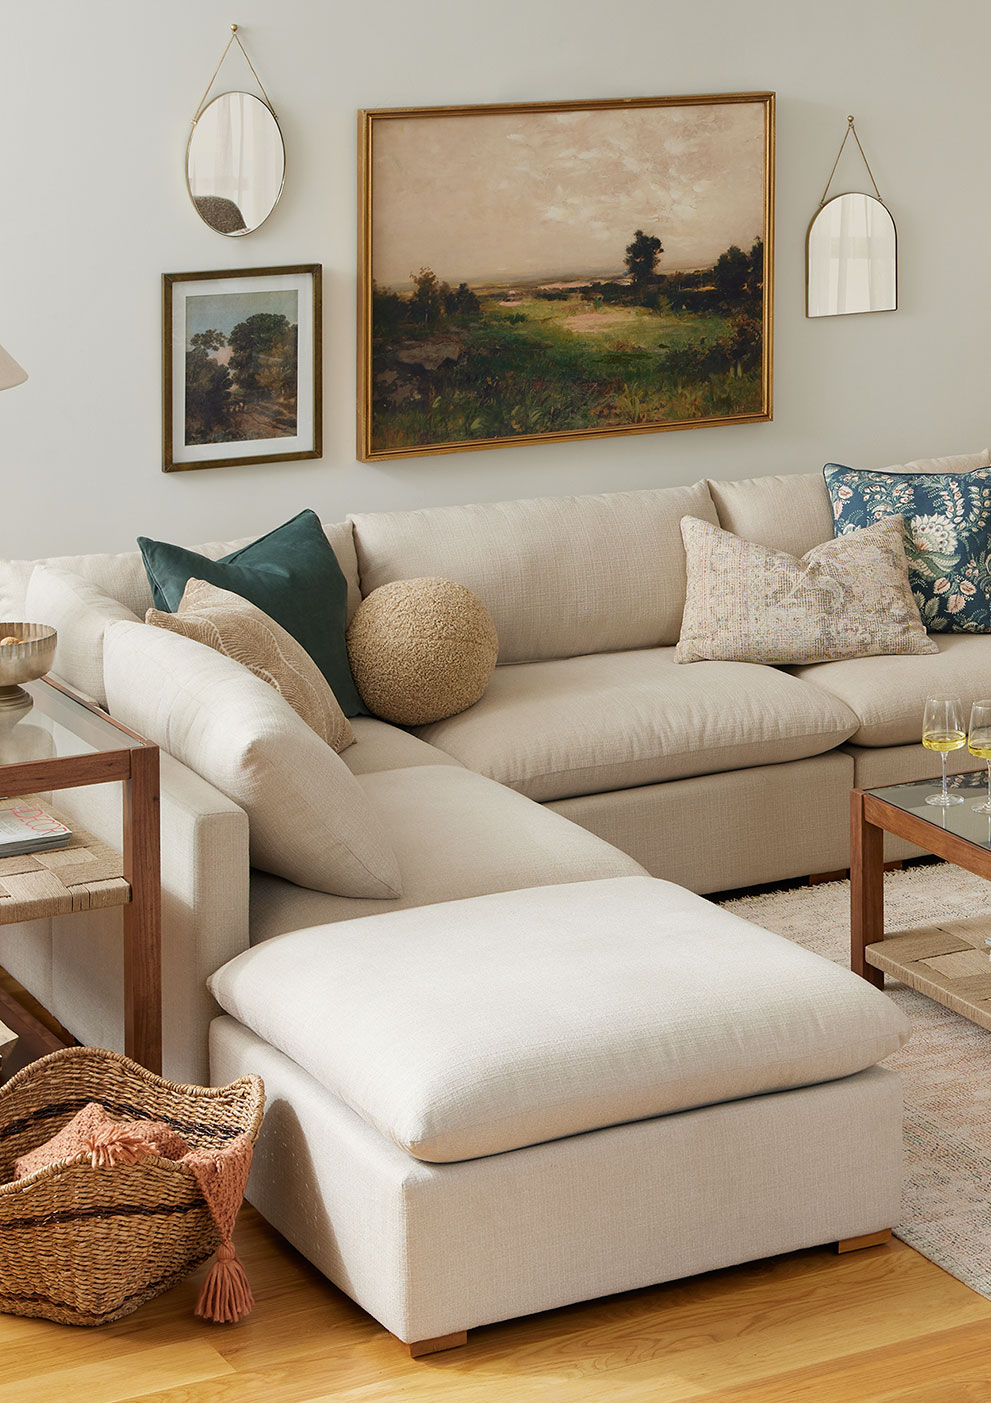 9 Behind Couch Decor Ideas for Your Living Room - Nikki's Plate